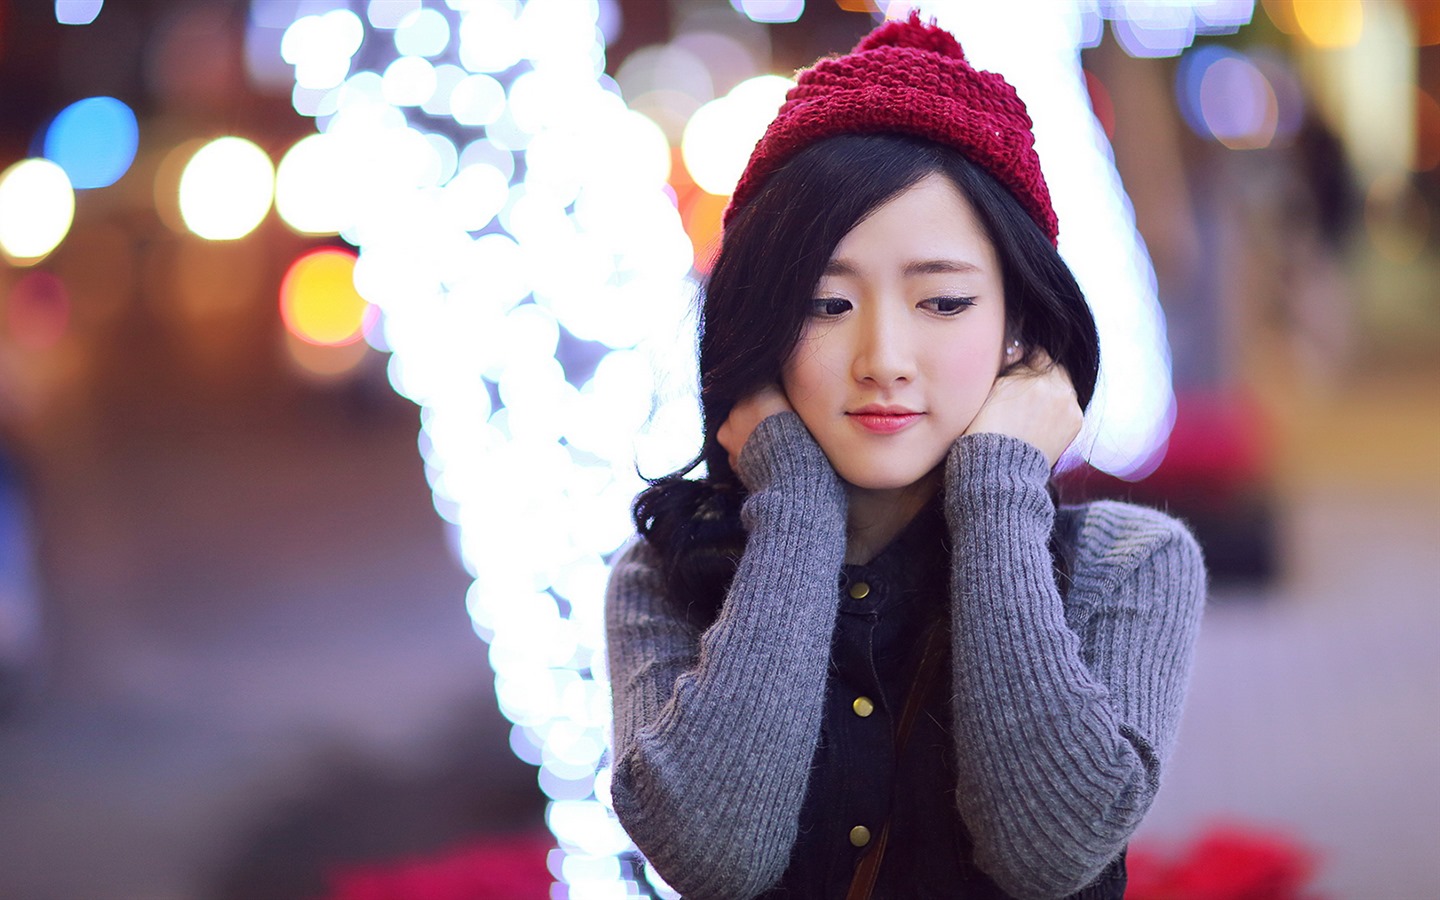 Pure and lovely young Asian girl HD wallpapers collection (1) #27 - 1440x900